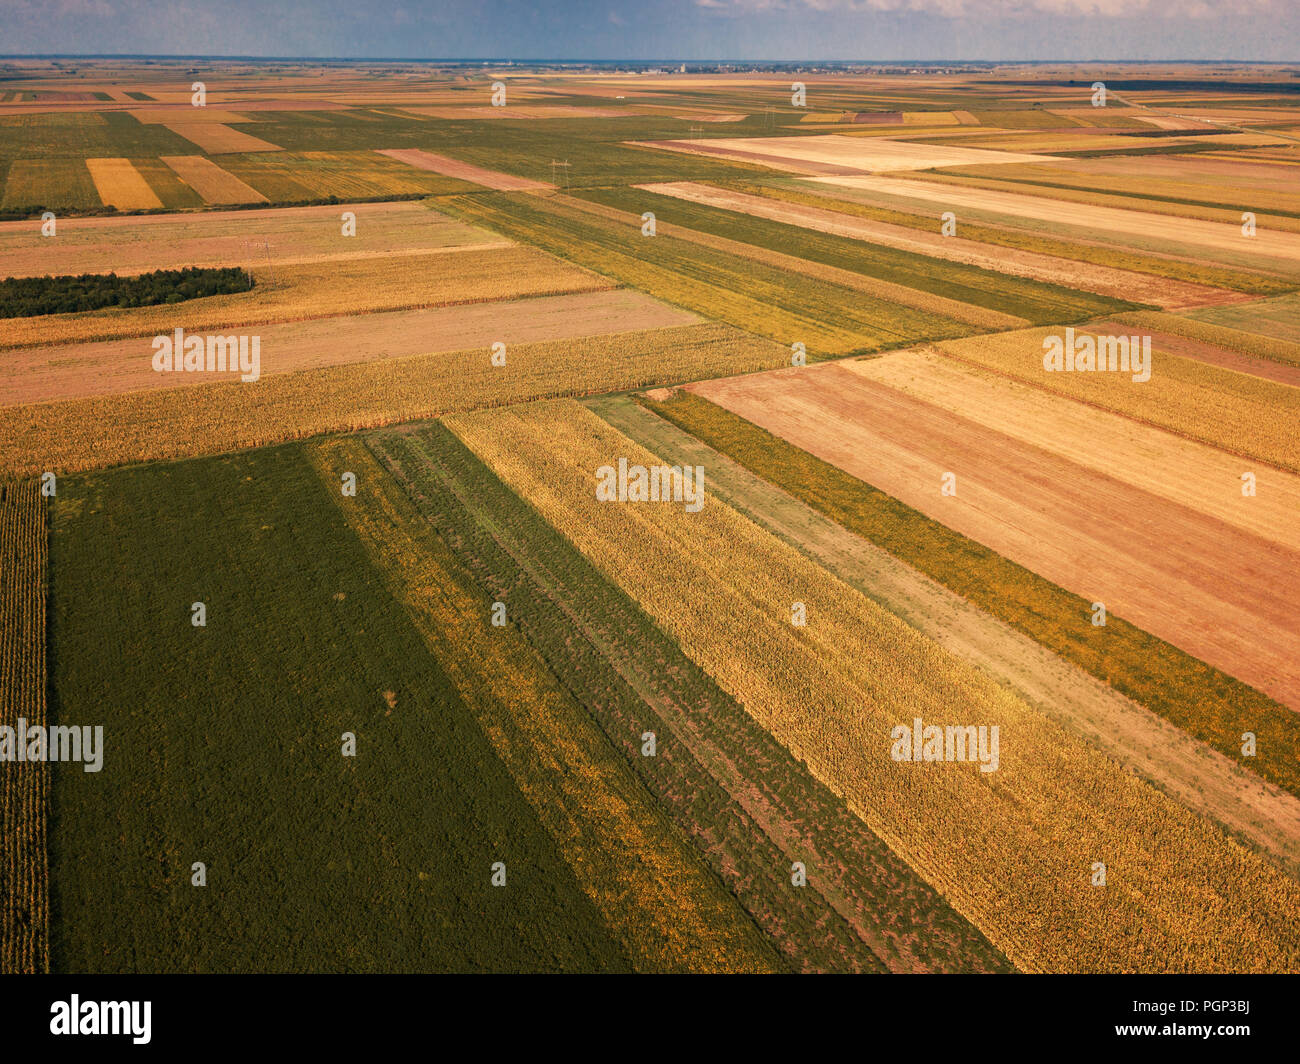 Drone photography of cultivated fields in summer, plain countryside landscape from high angle view Stock Photo